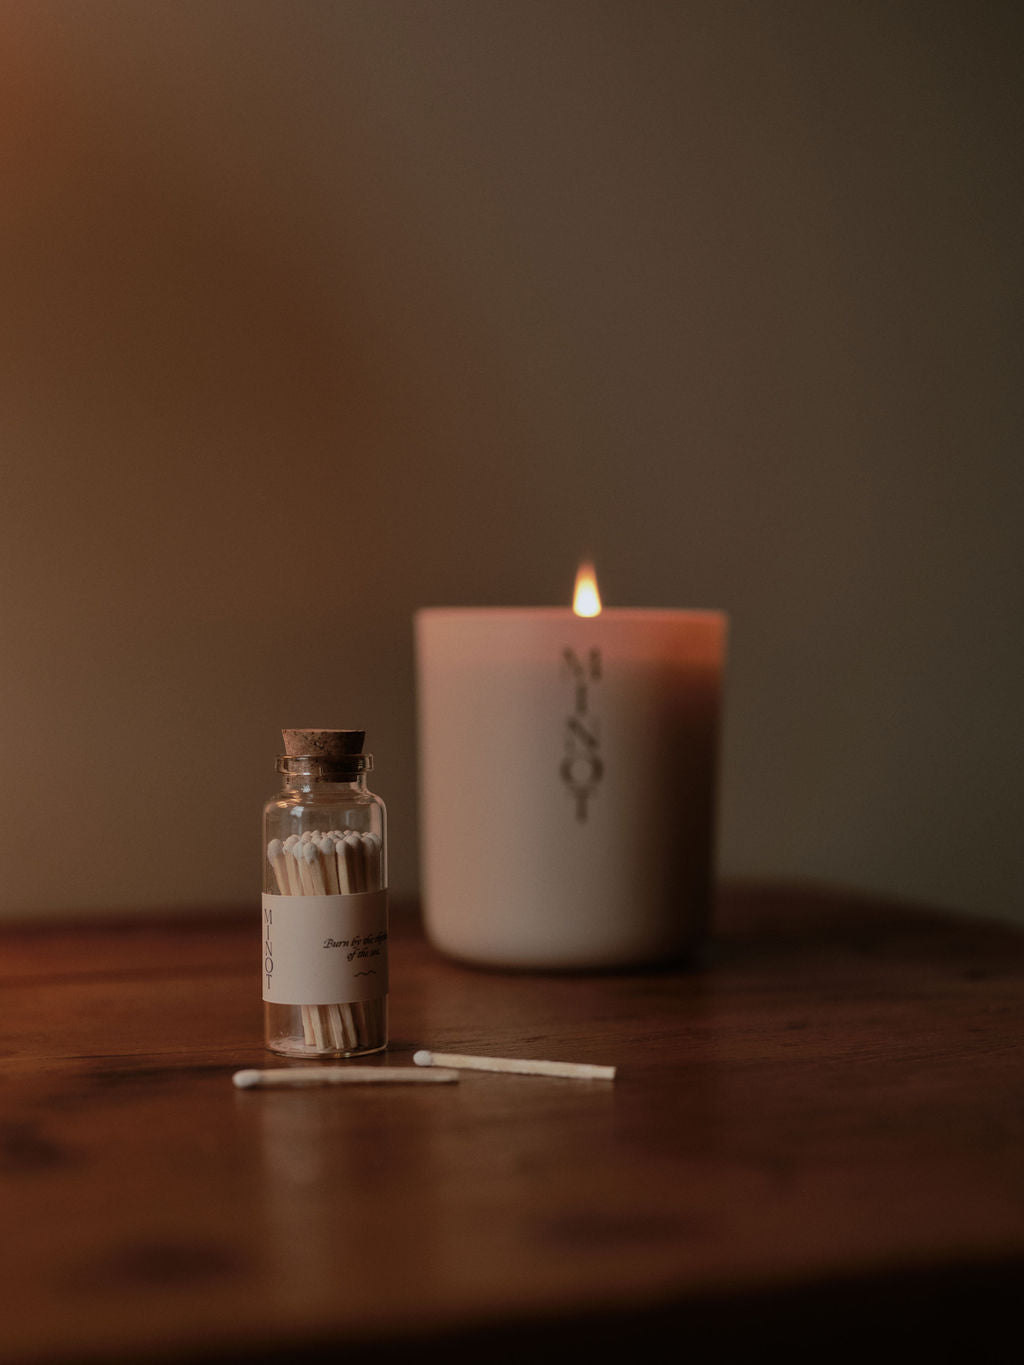 MINOT safety matches in a small glass jar next to a clean-burning soy wax signature candle